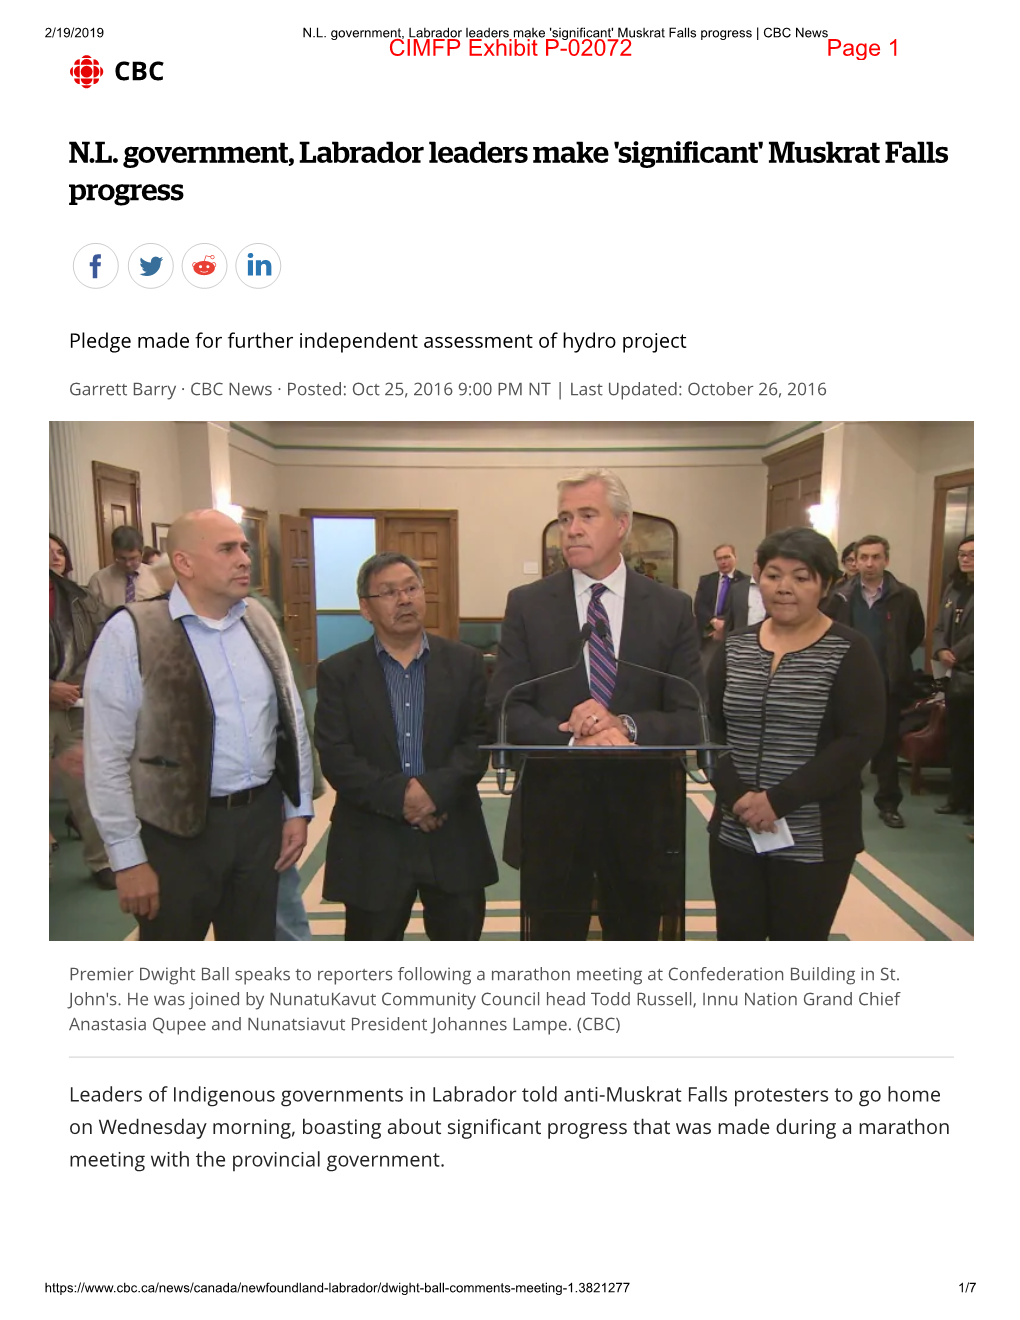 NL Government, Labrador Leaders Make 'Significant'